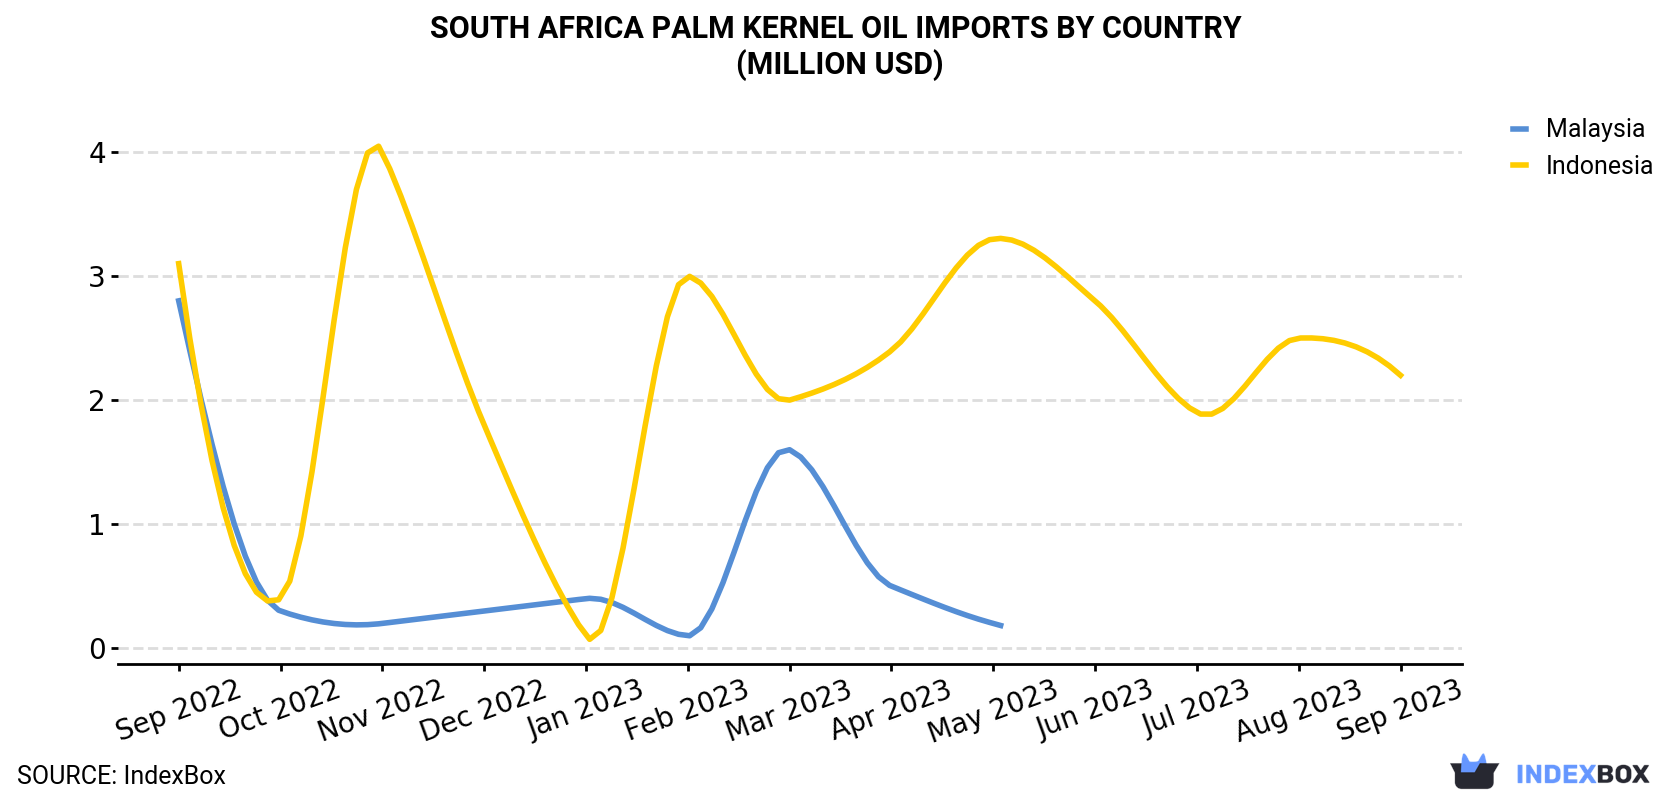 South Africa Palm Kernel Oil Imports By Country (Million USD)